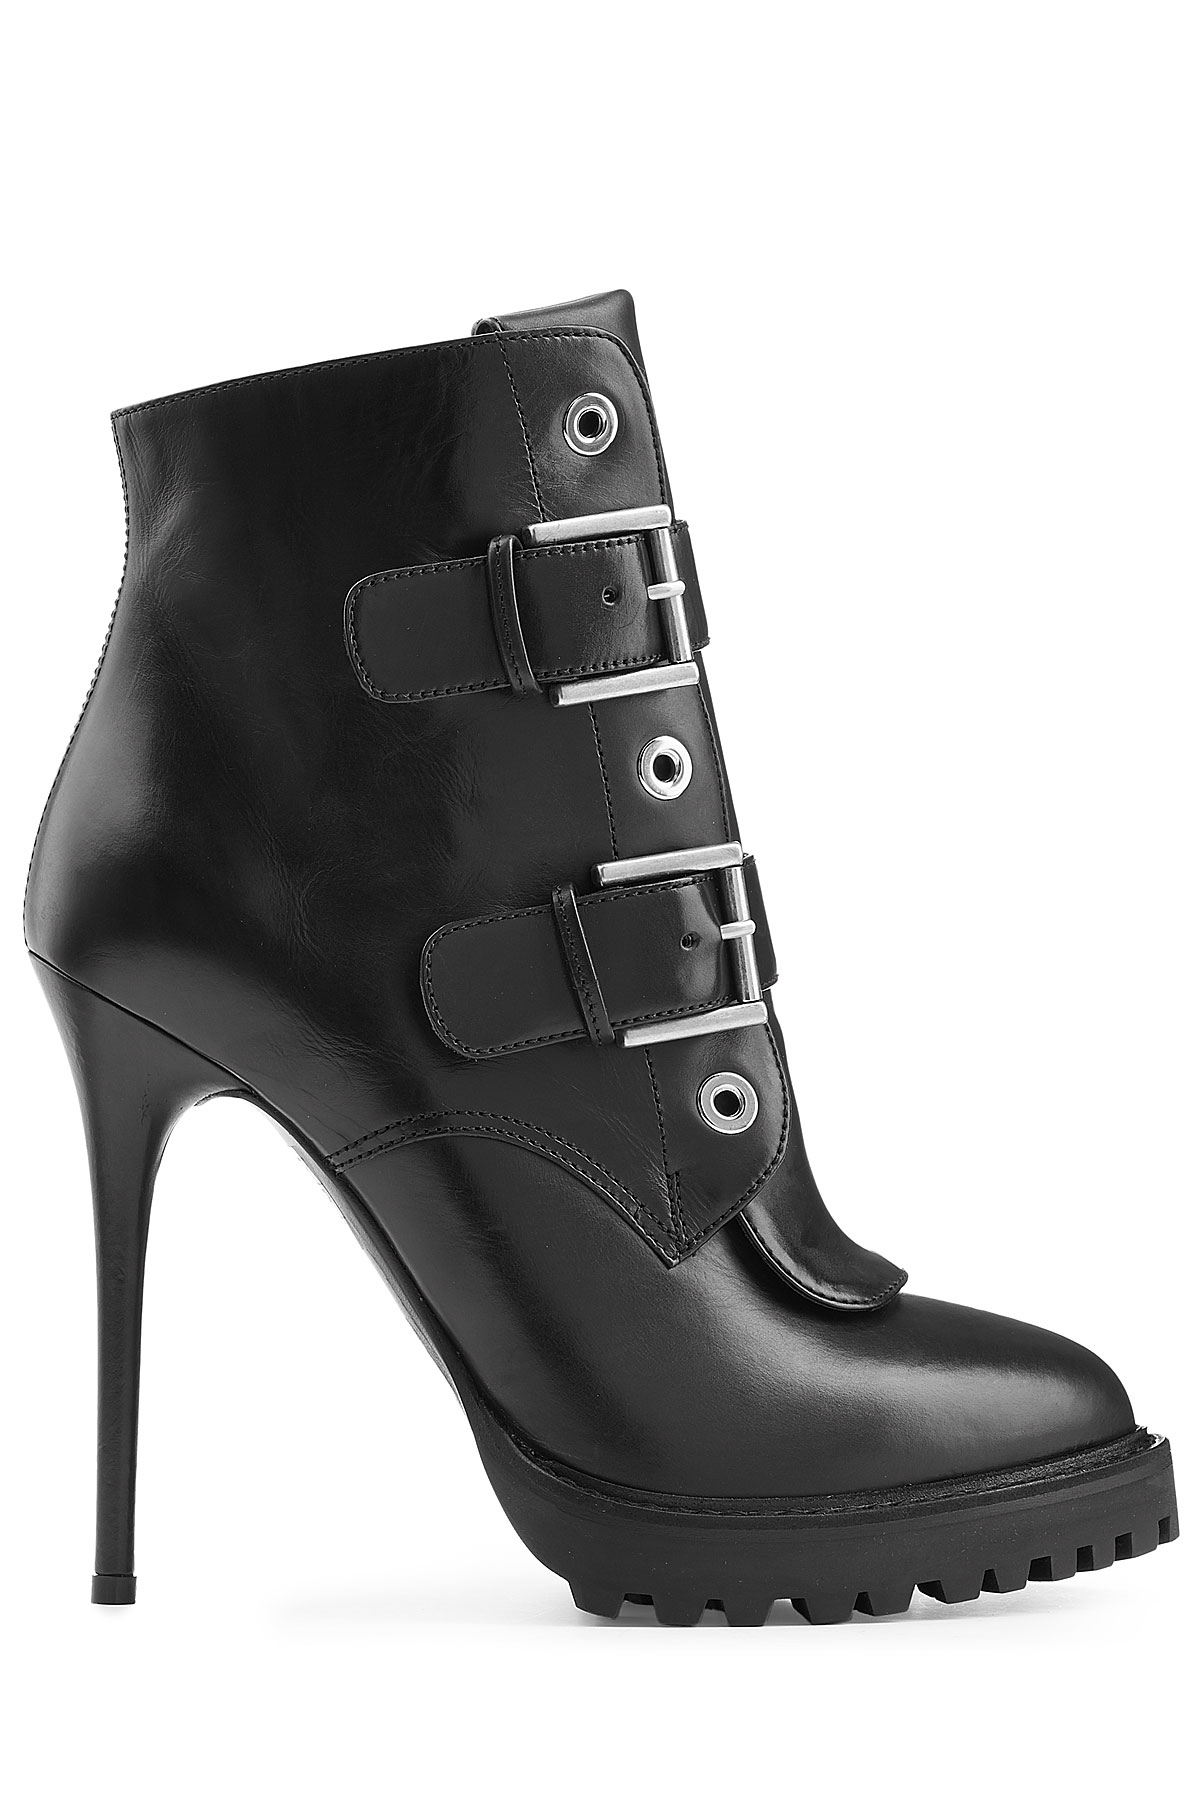 Lyst - Alexander Mcqueen Leather Ankle Boots - Black in Black